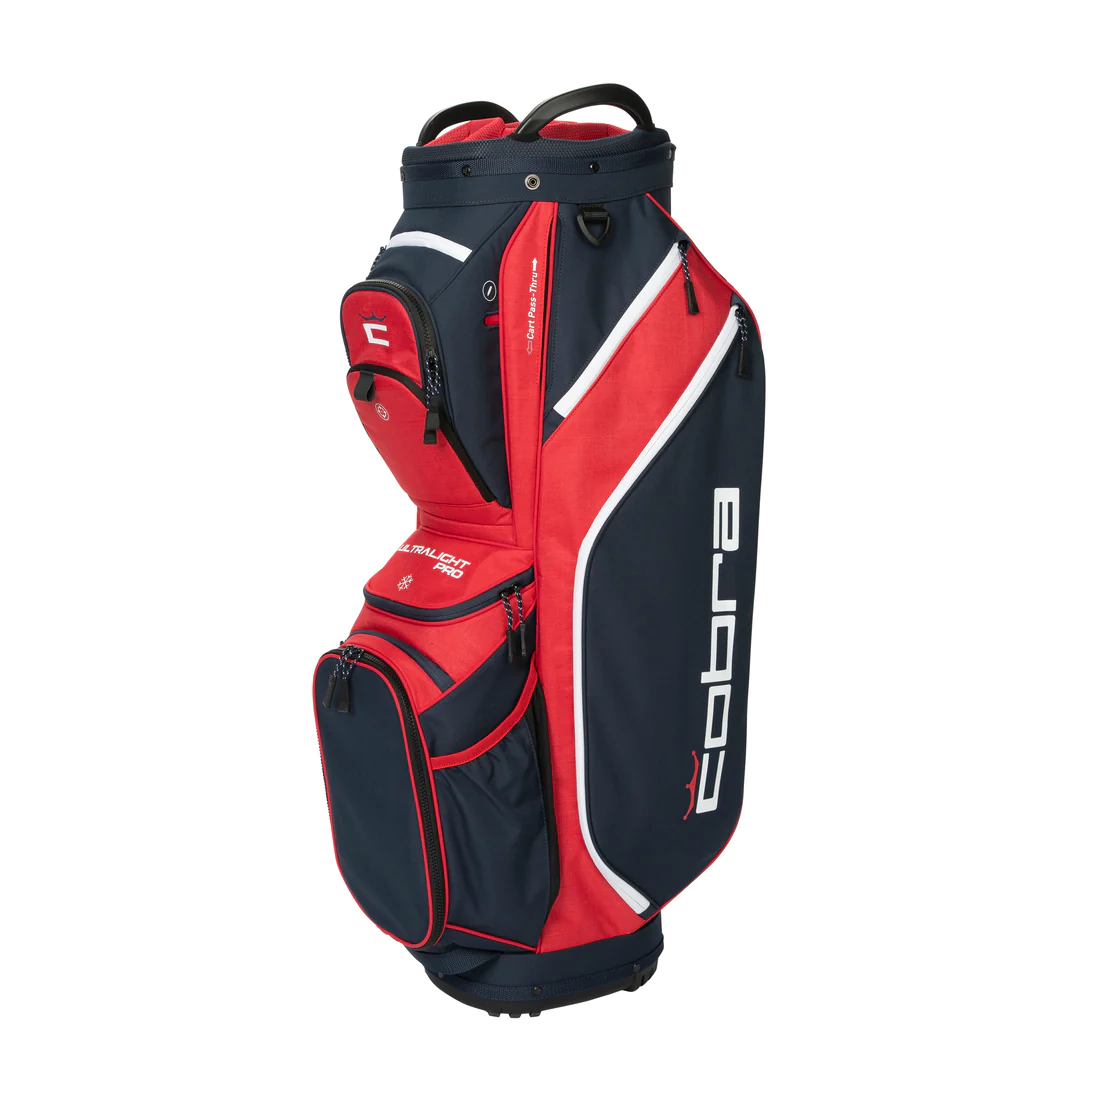 Closeout Golf Bags, Discounted Golf Bags